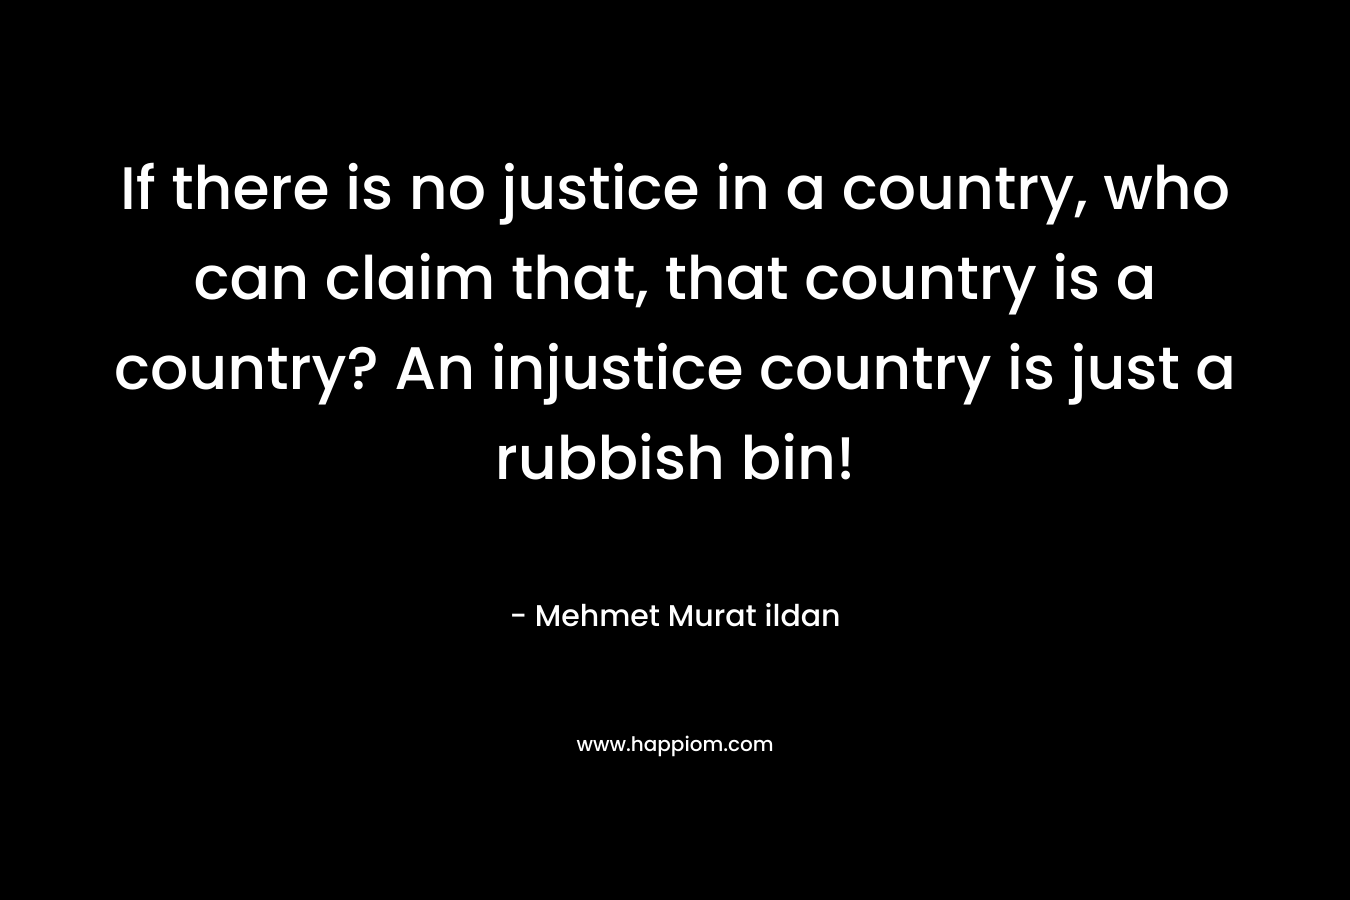 If there is no justice in a country, who can claim that, that country is a country? An injustice country is just a rubbish bin!